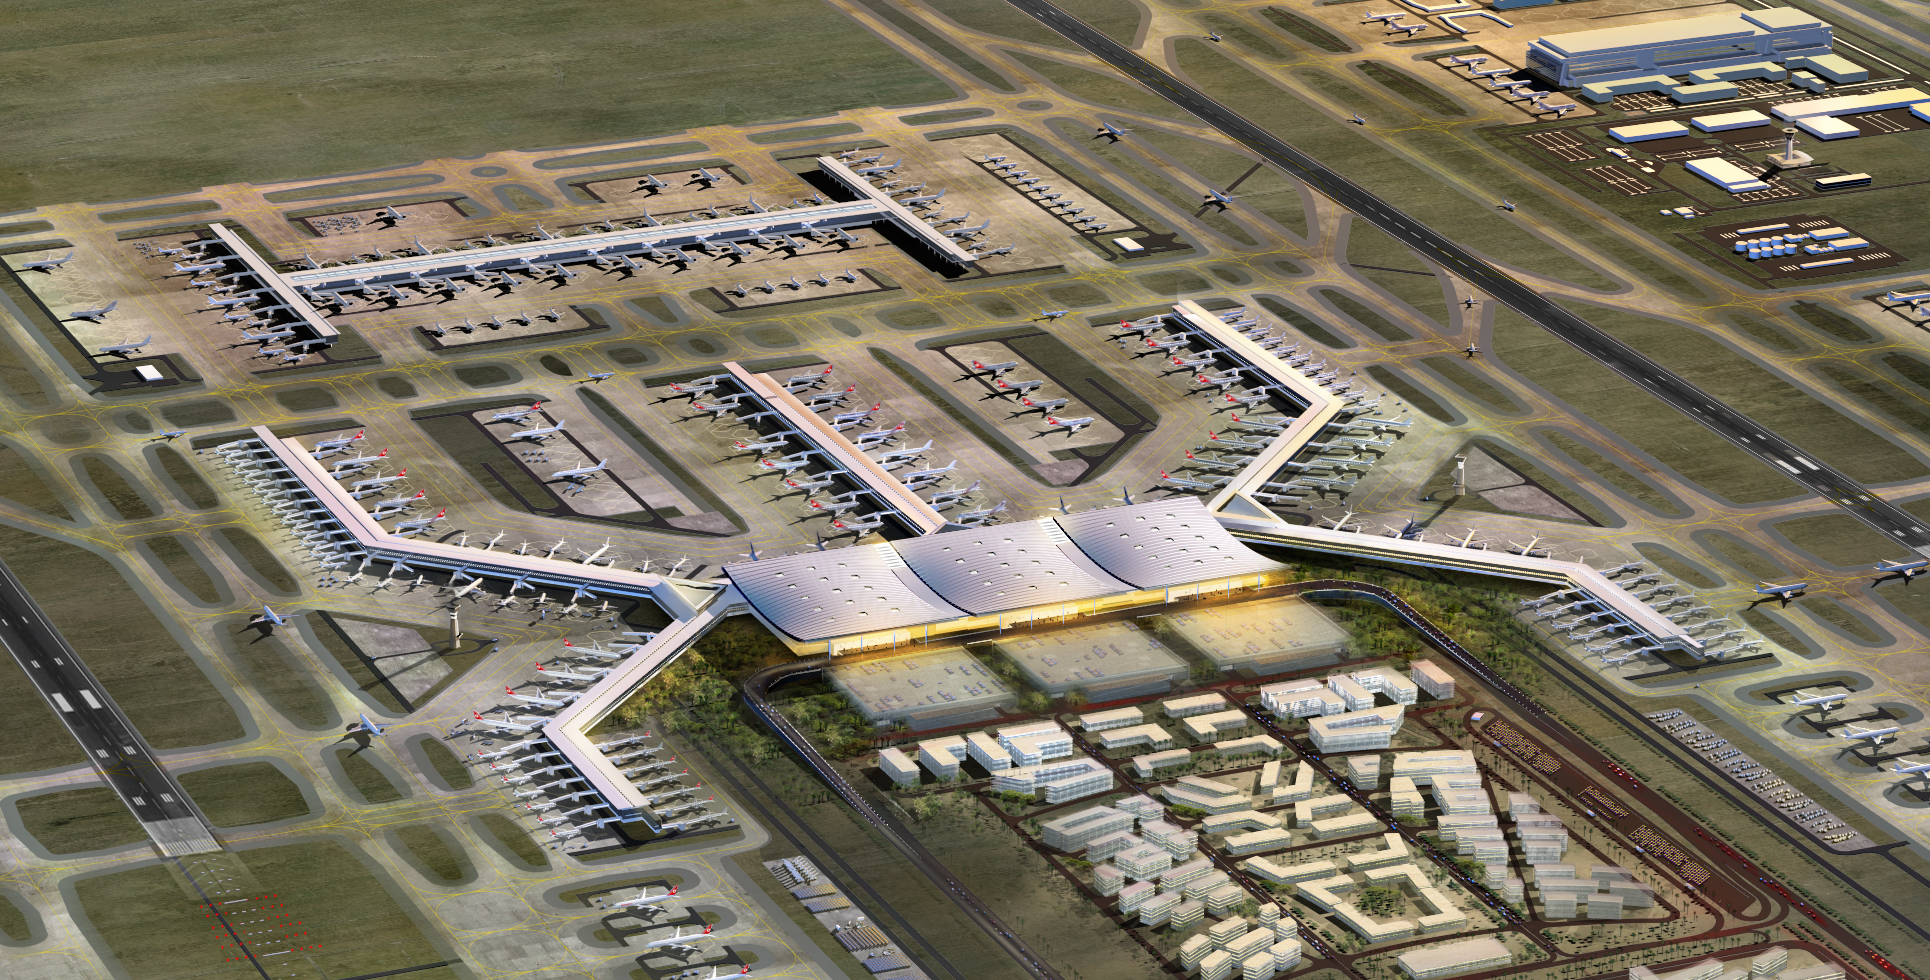 İstanbul New Airport